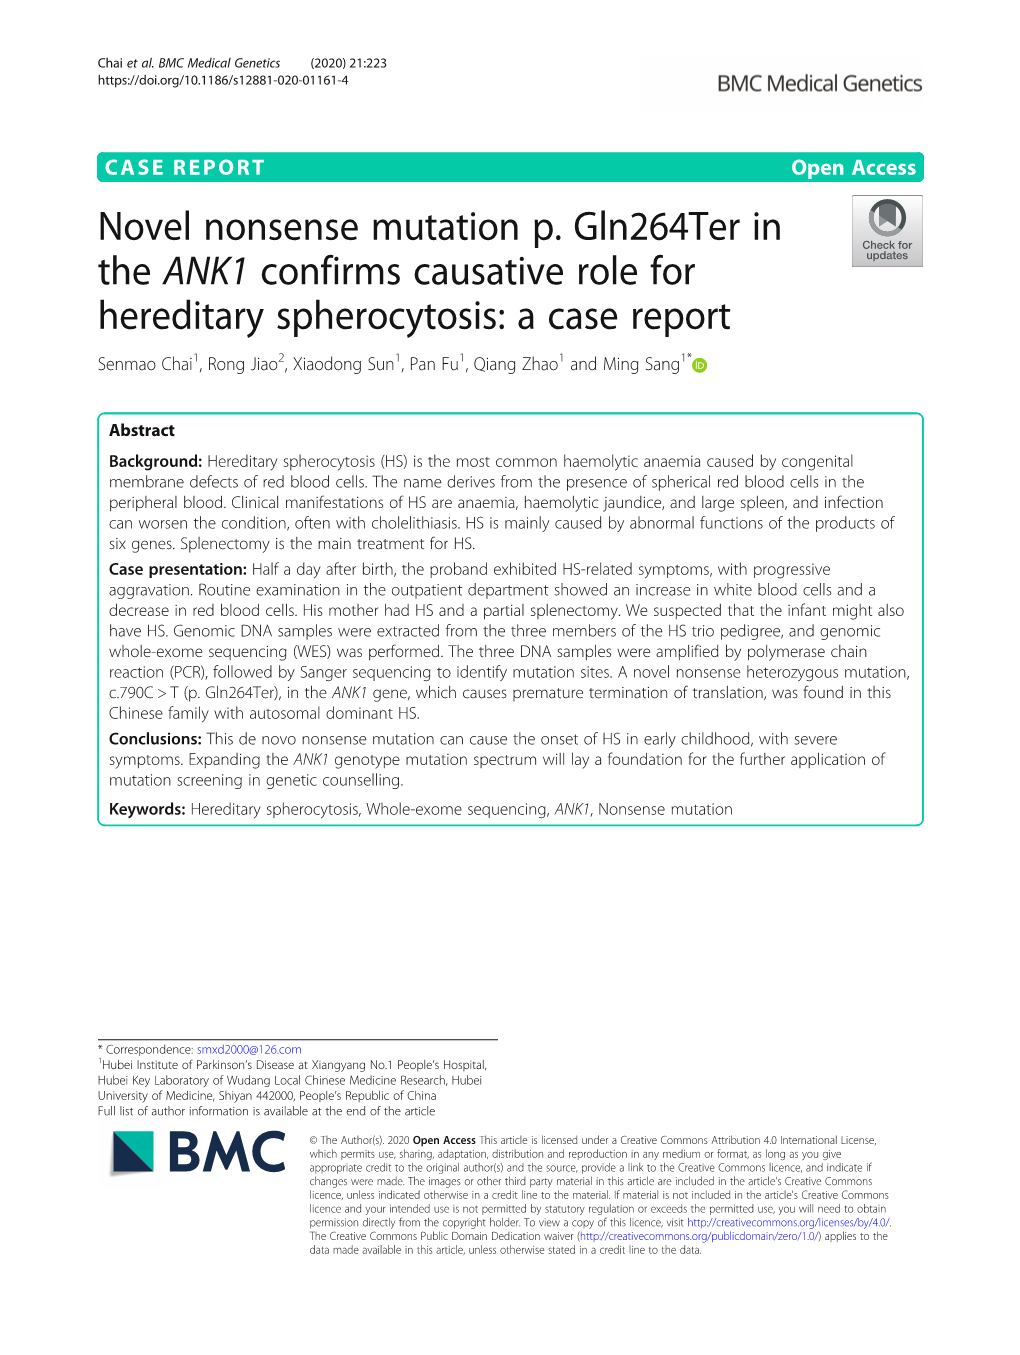 Novel Nonsense Mutation P. Gln264ter in the ANK1 Confirms Causative Role for Hereditary Spherocytosis: a Case Report